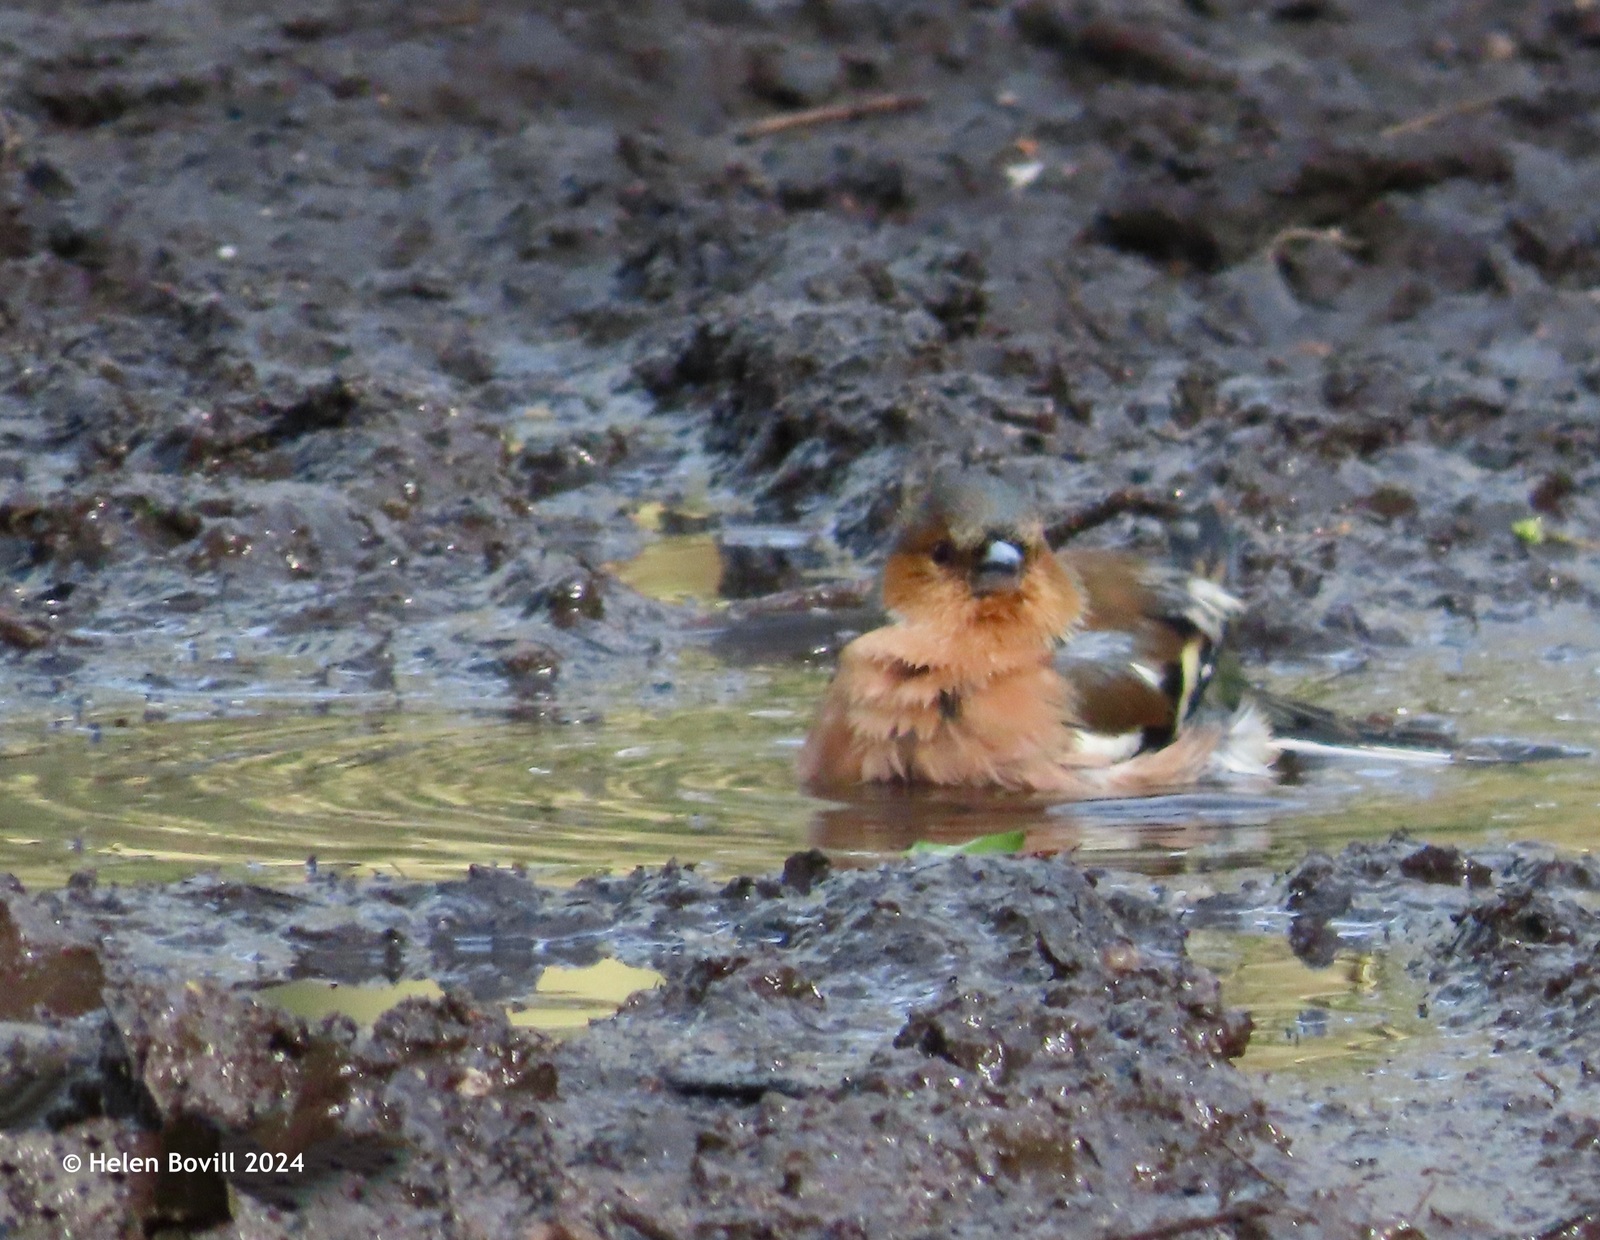 A male chaffinch bathing in a puddle in the cemetery